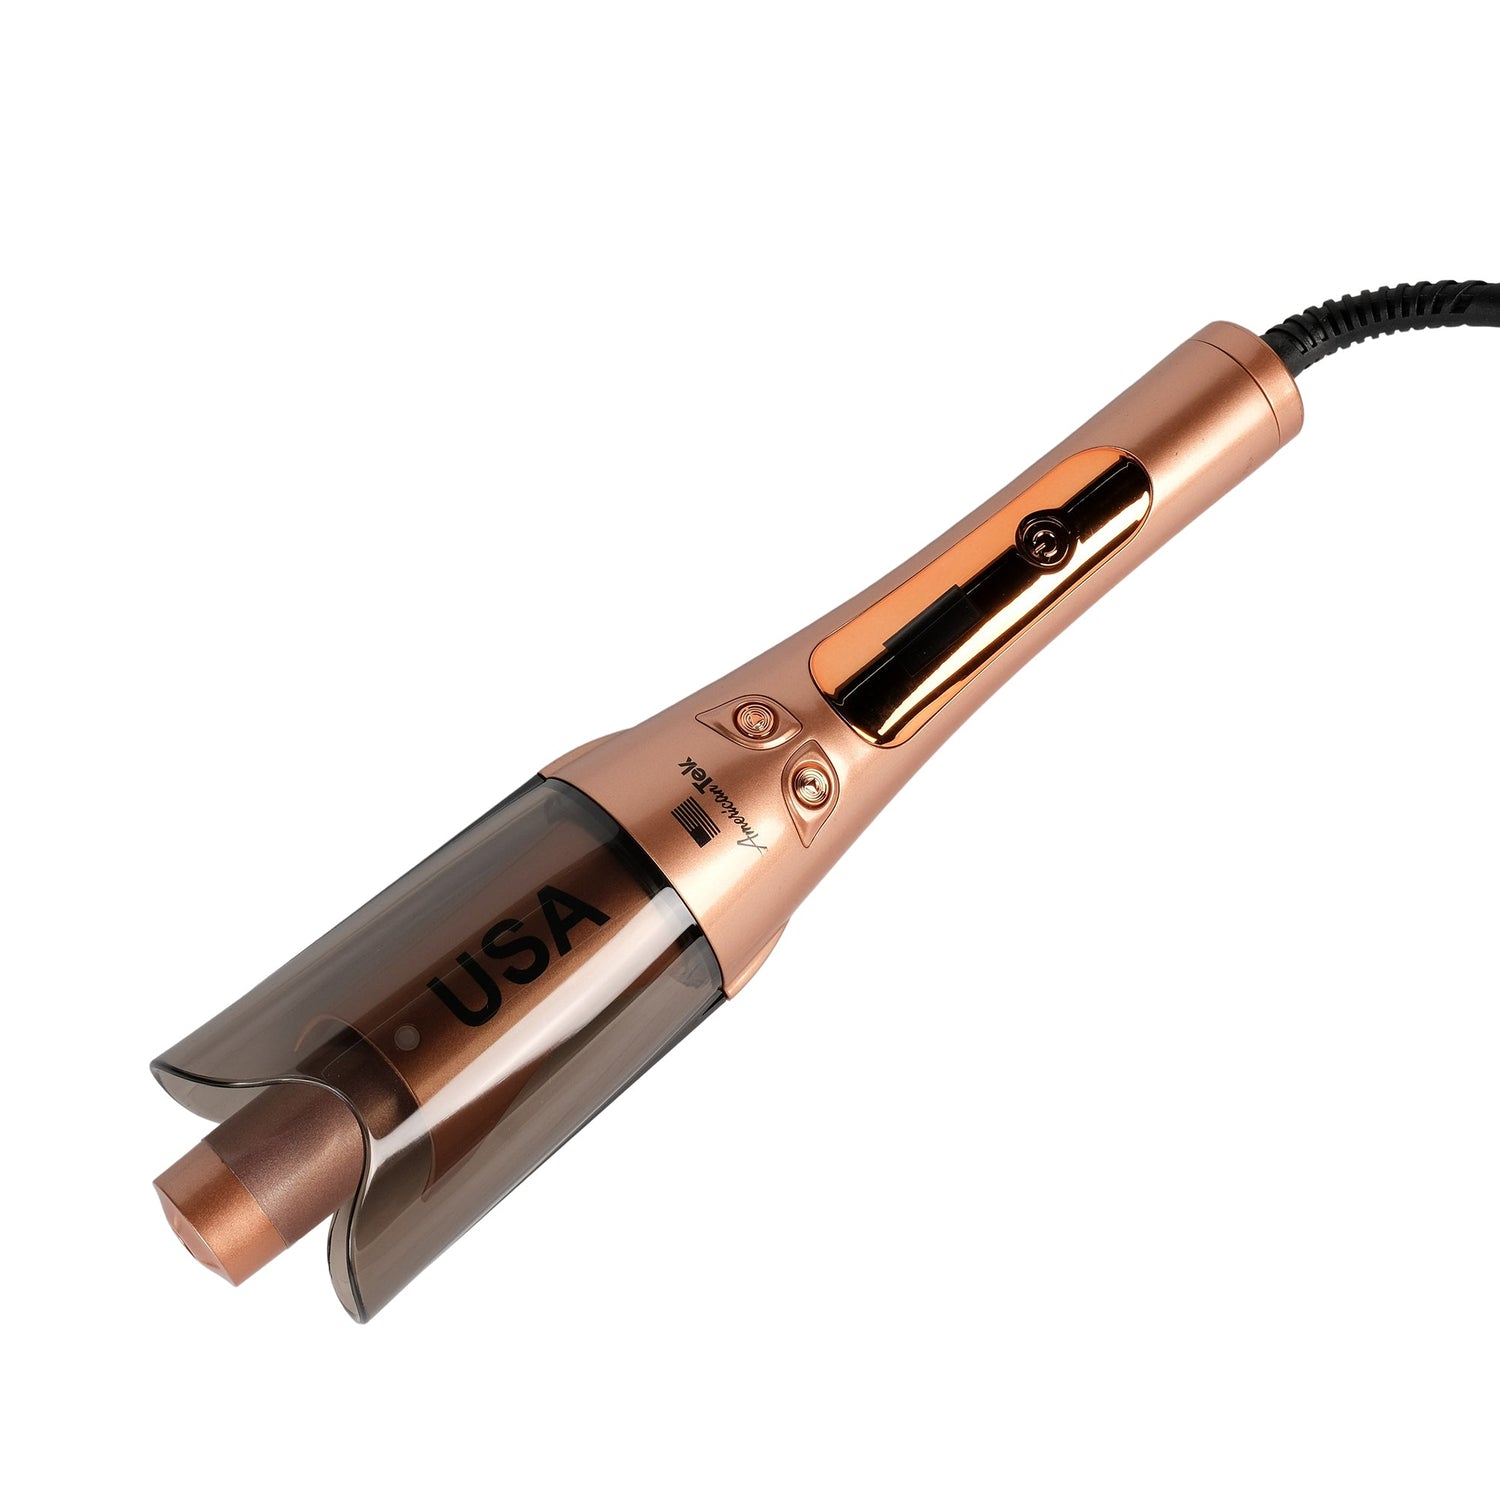 American Tek Automatic Curling Iron Wand- Auto Curler with 4 Temperatures & 3 Timers & LCD Display, Curling Iron with 1" Large Rotating Barrel, Auto Shut-Off Spin Iron for Hair Styling - Gold - Couture Hair Pro